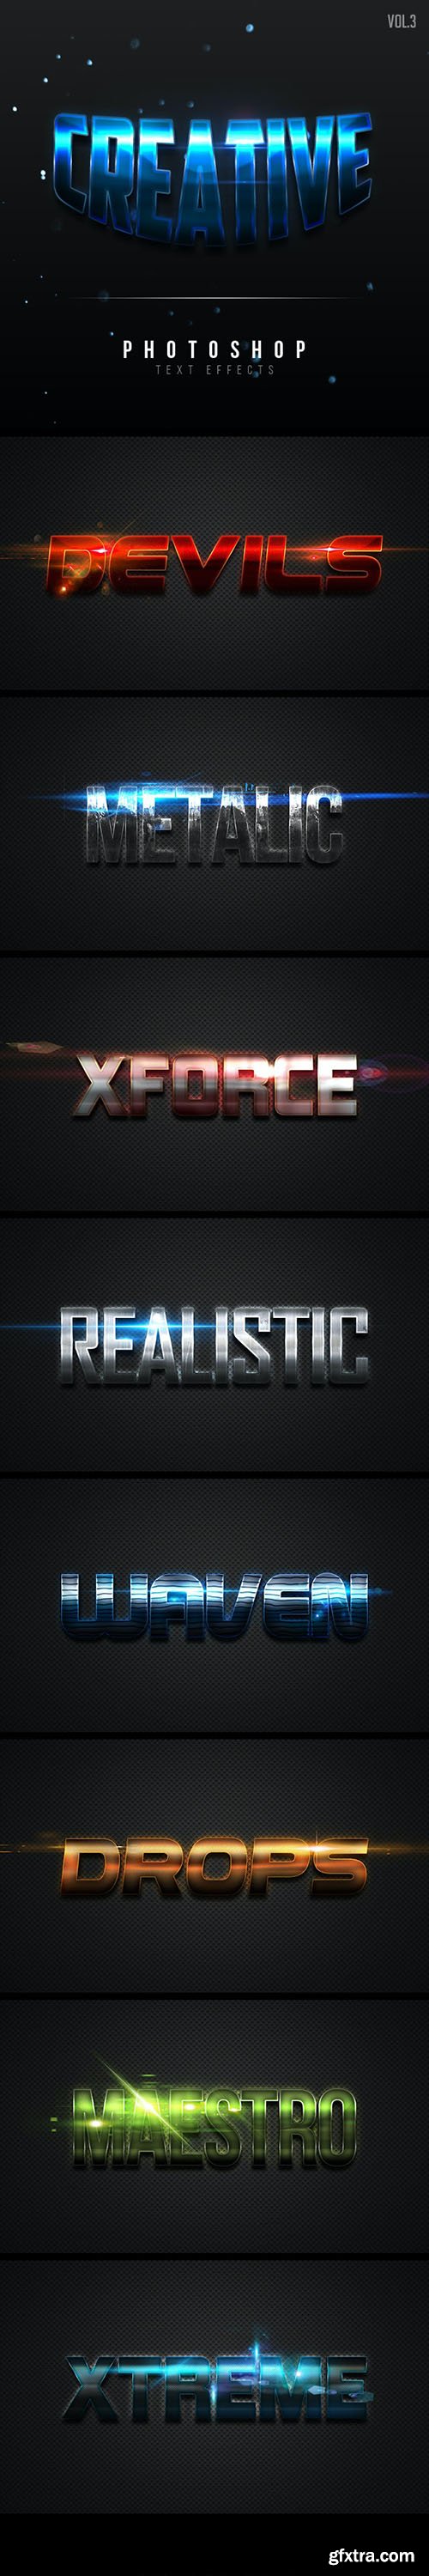 GraphicRiver - Creative Text Effects Vol.3 24286165